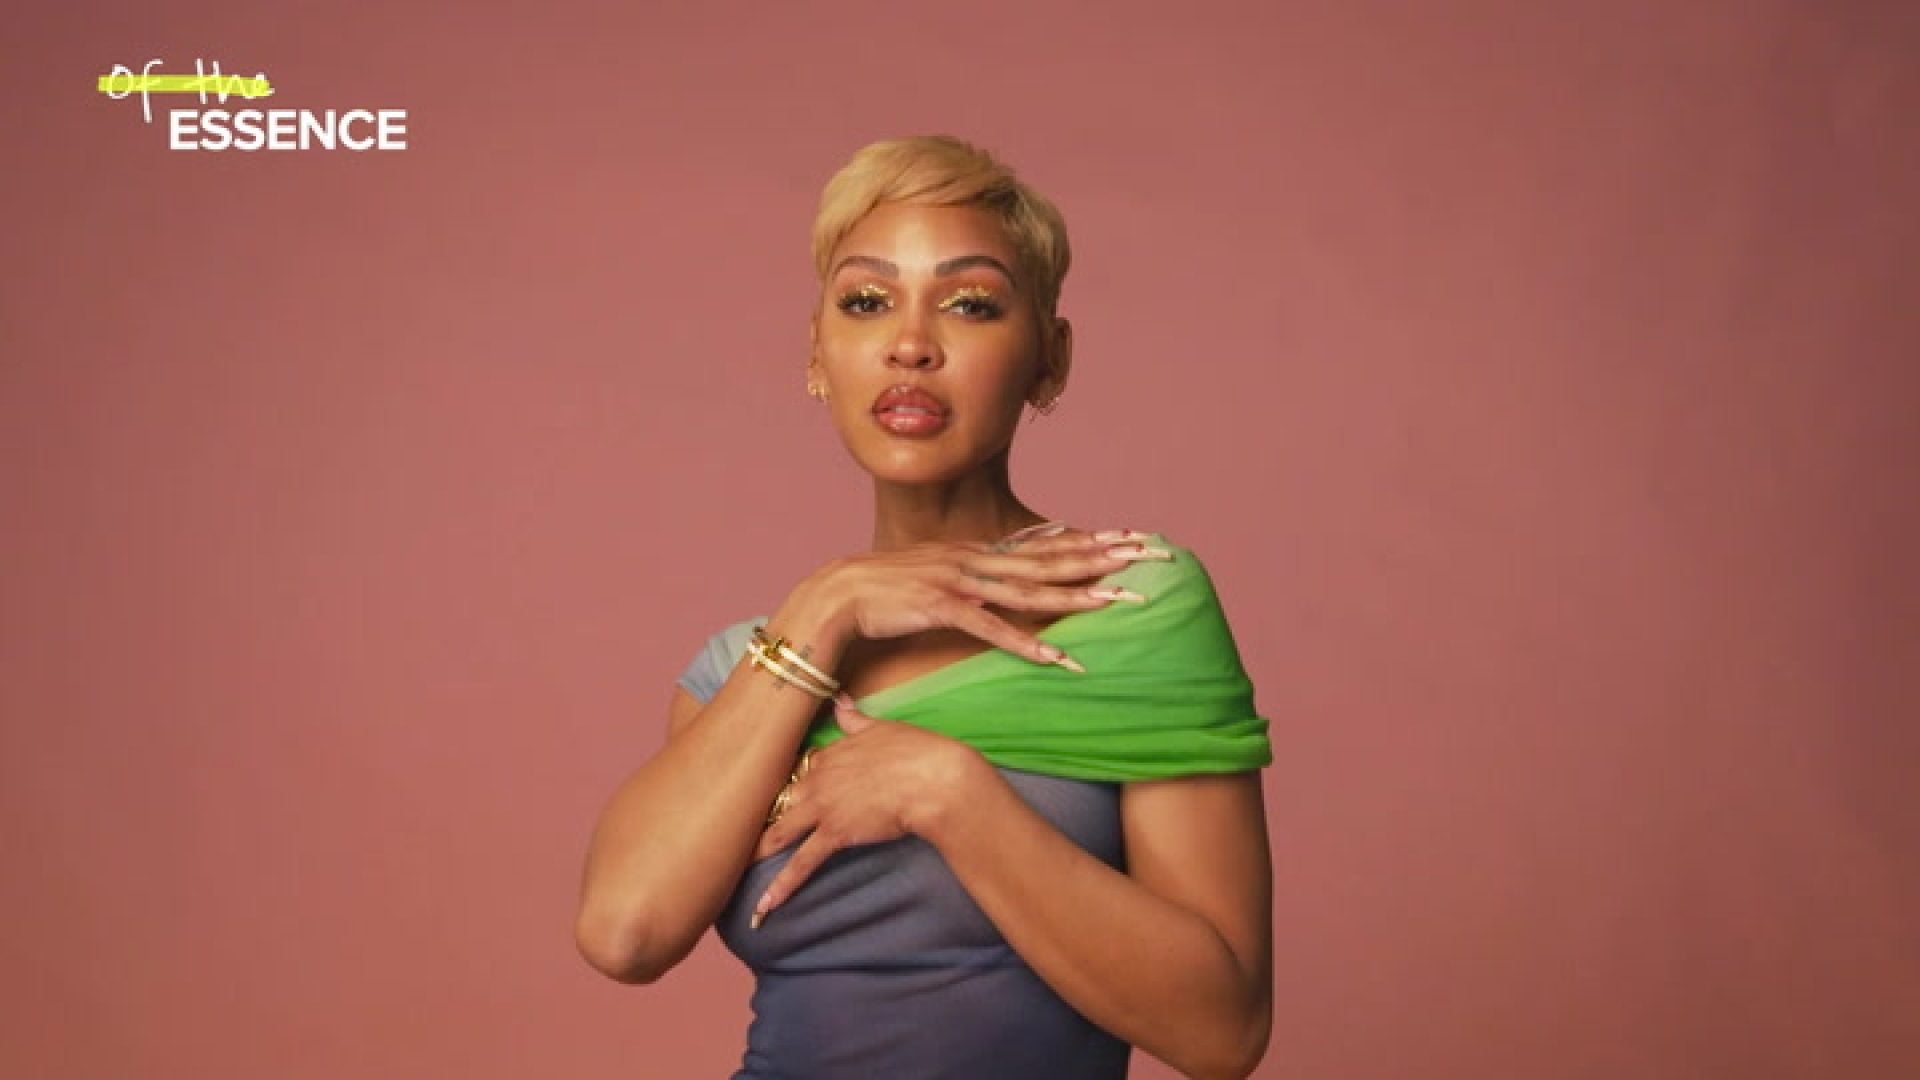 WATCH: Of The Essence - Meagan Good Says She's In Her Prime